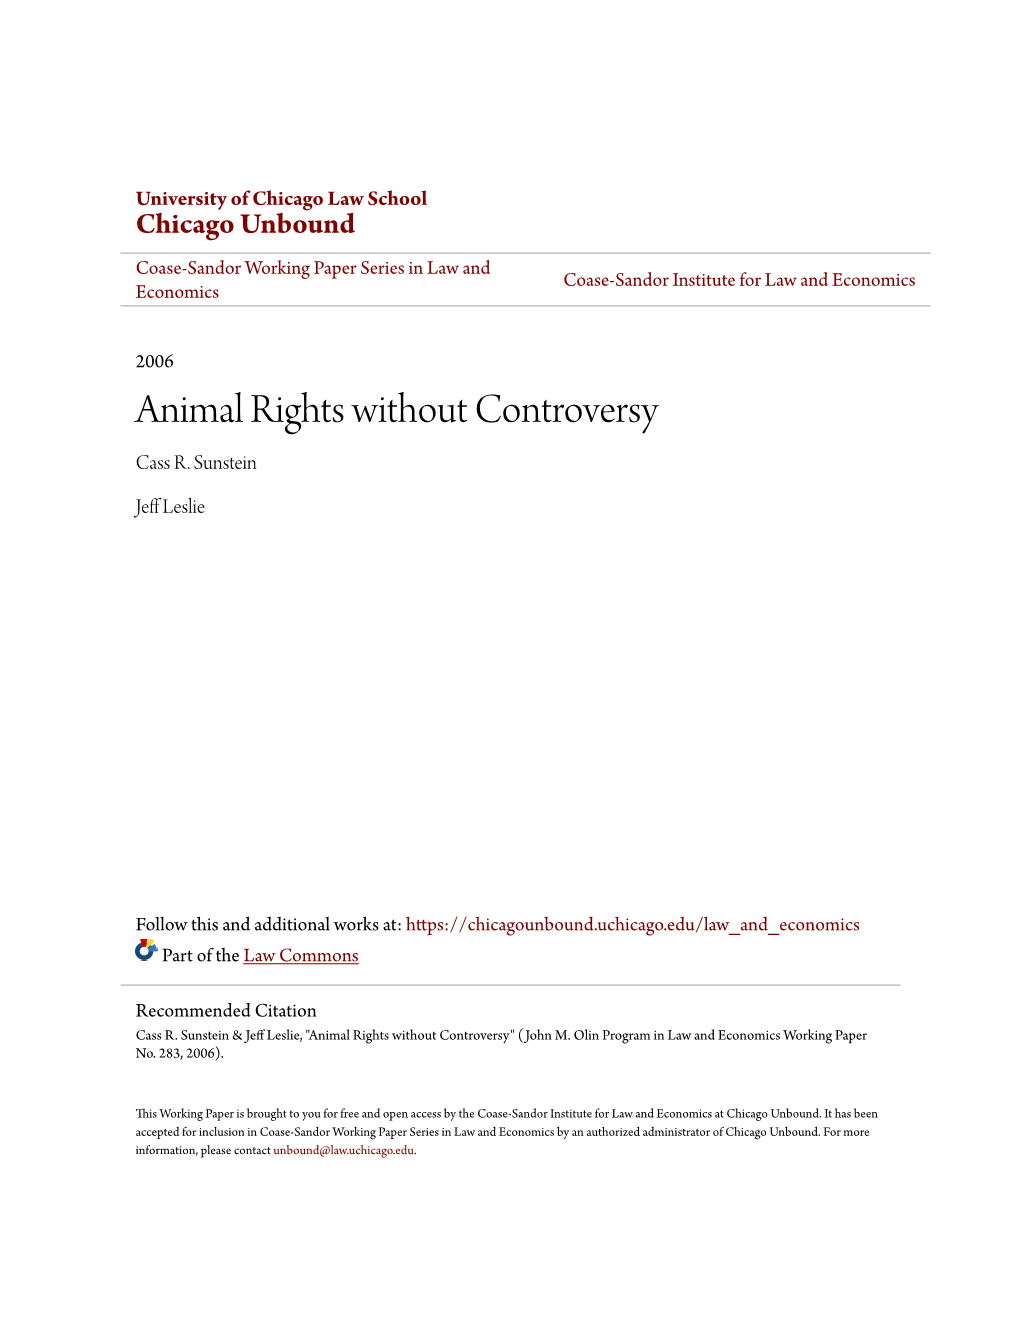 Animal Rights Without Controversy Cass R